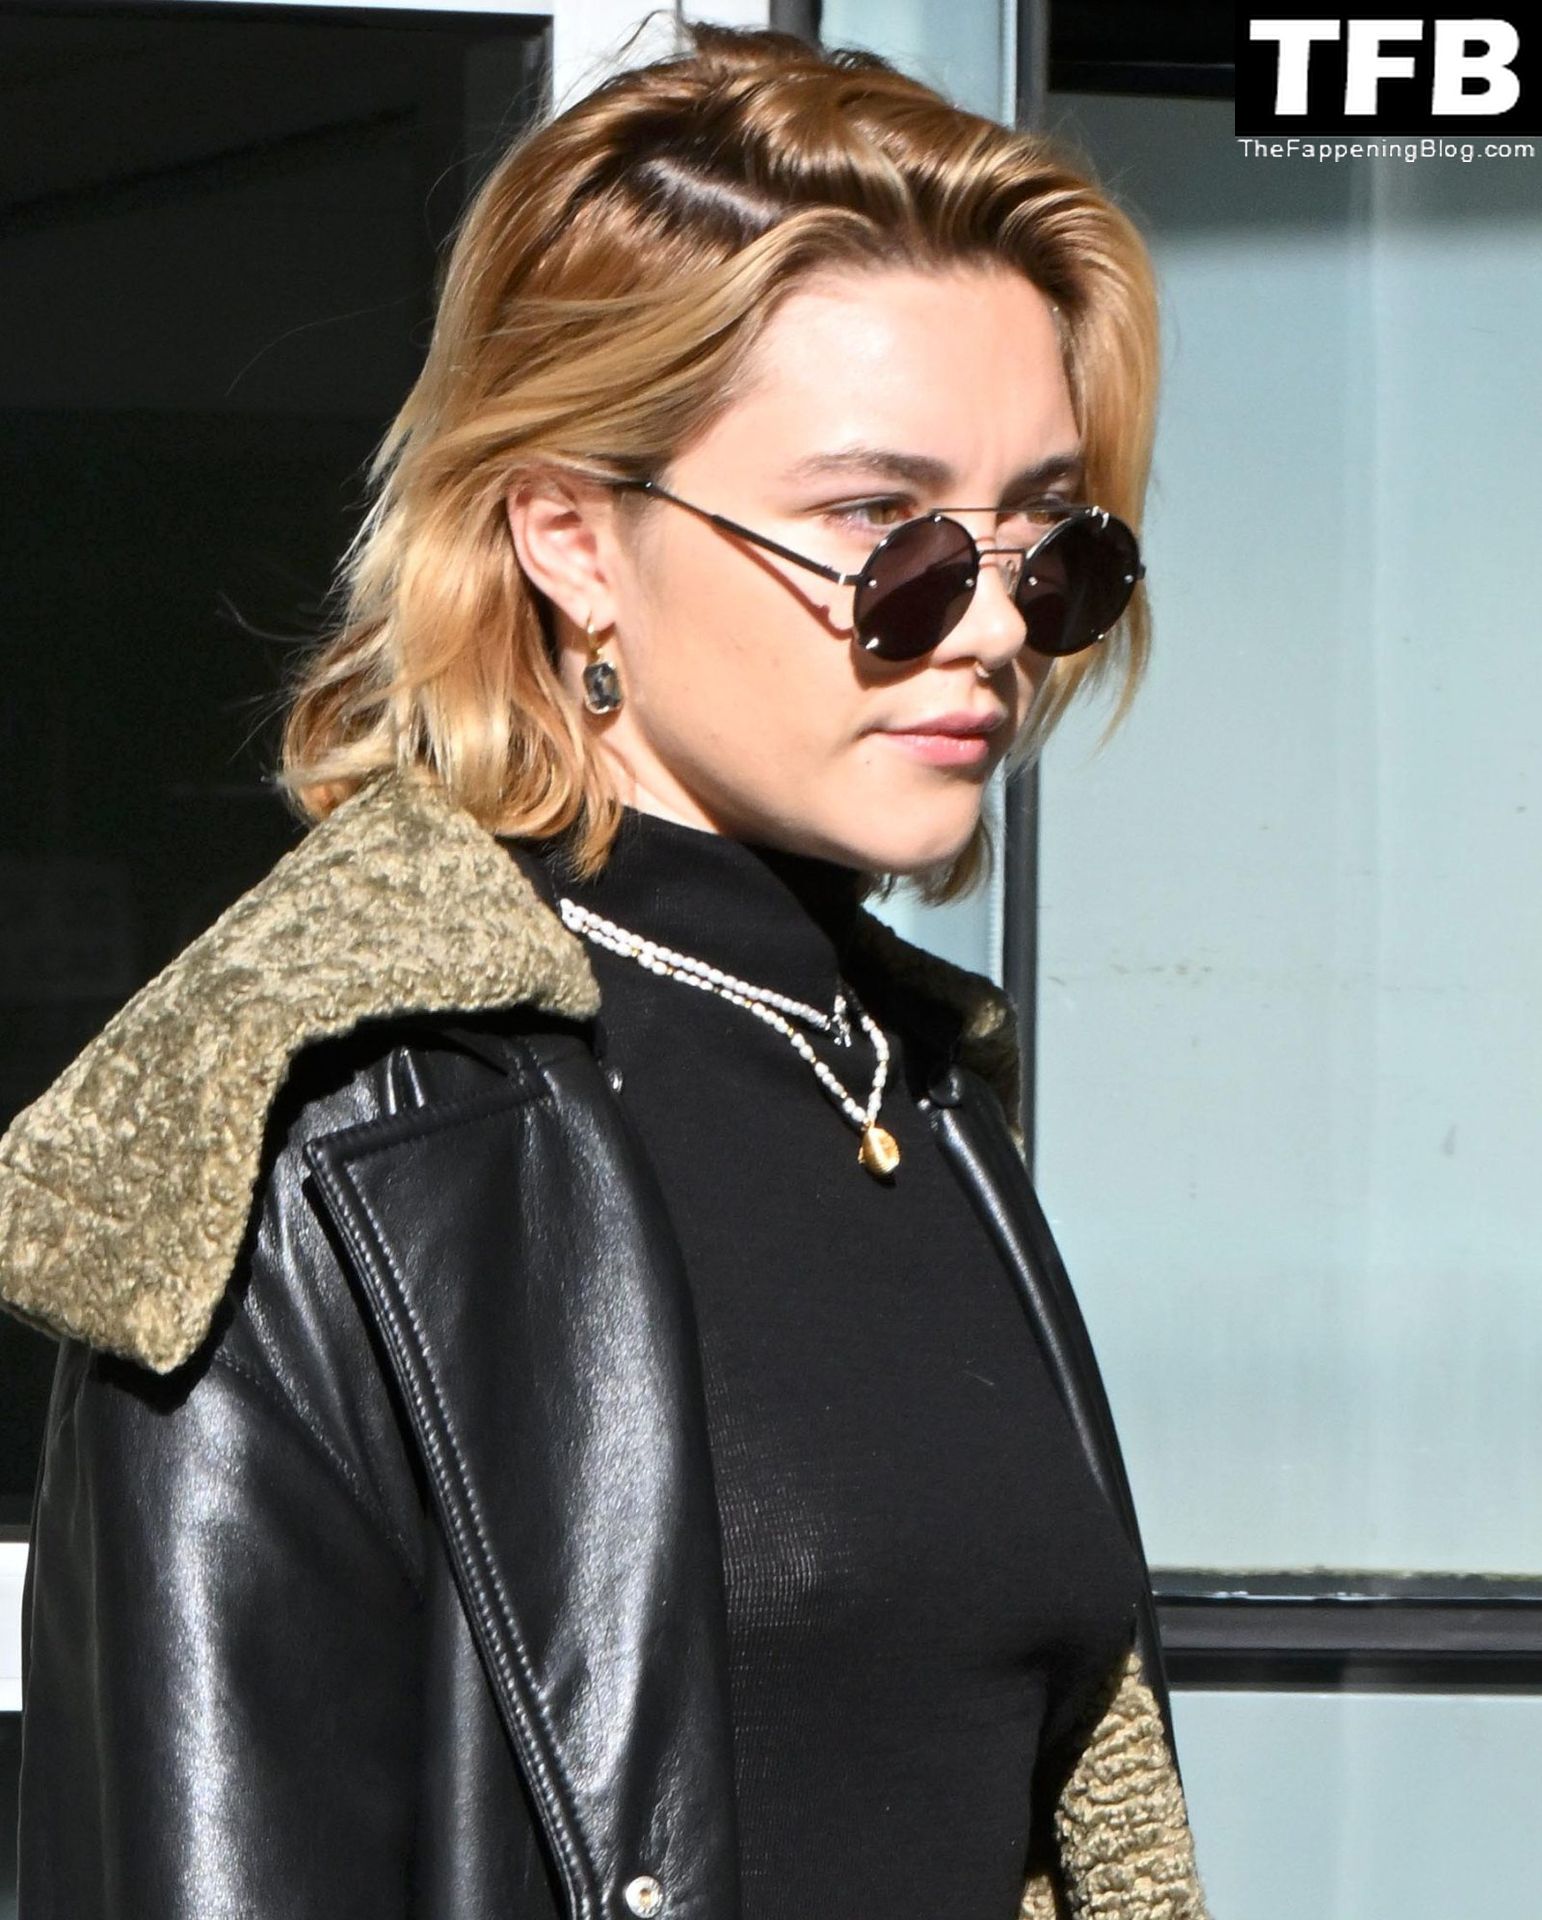 Florence Pugh Pokies The Fappening Blog 29 - Florence Pugh Shows Off Her Pokies at JFK airport in NYC (31 Photos)